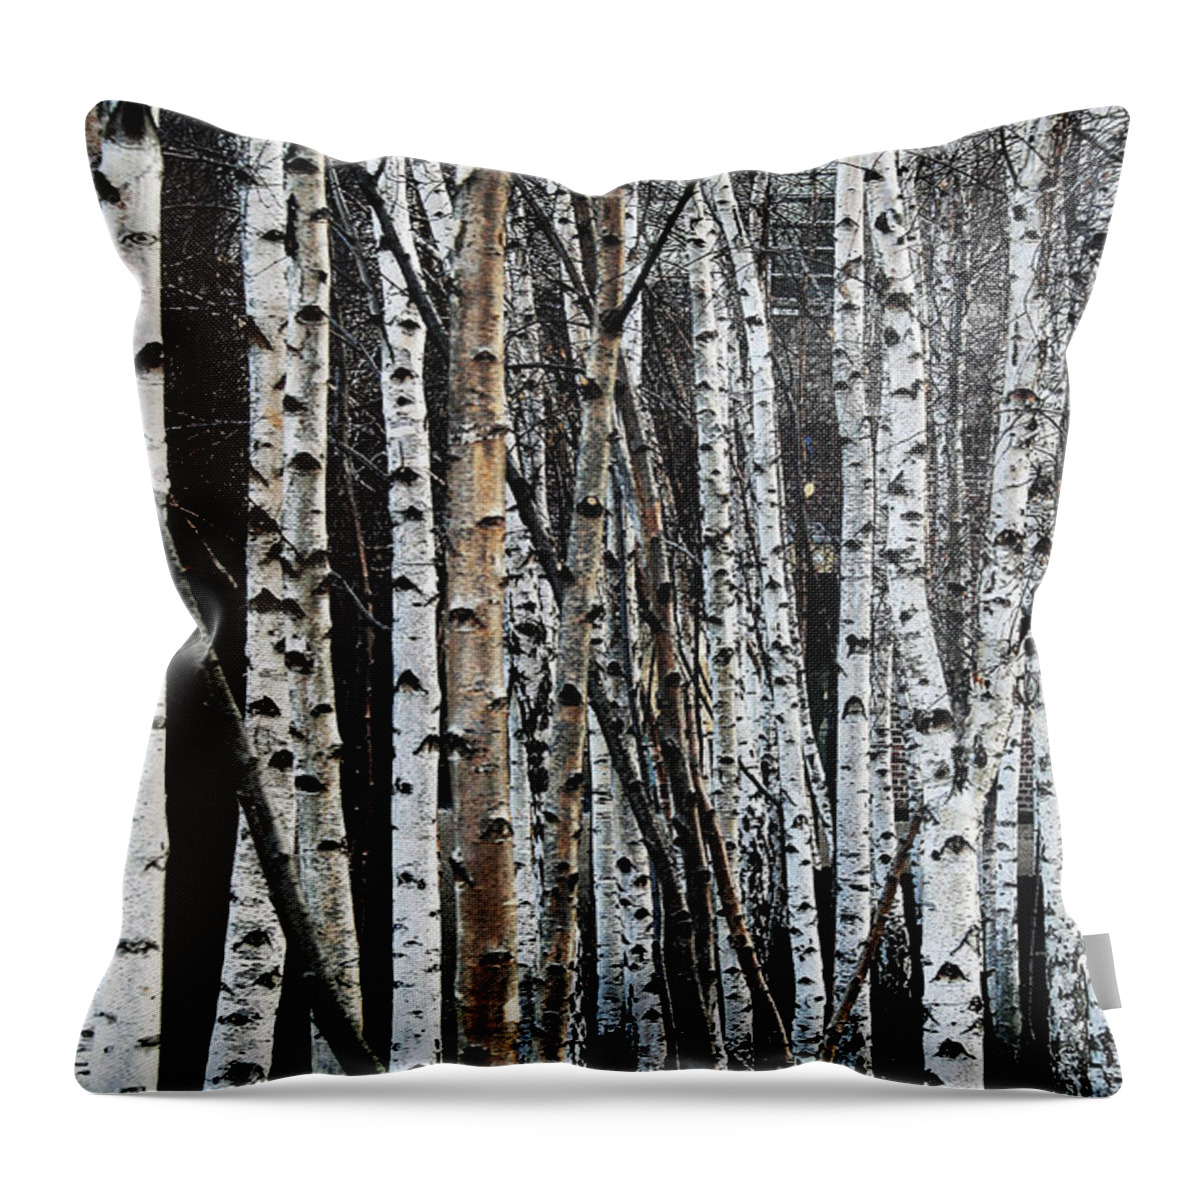 Trees Throw Pillow featuring the digital art Birch by Julian Perry